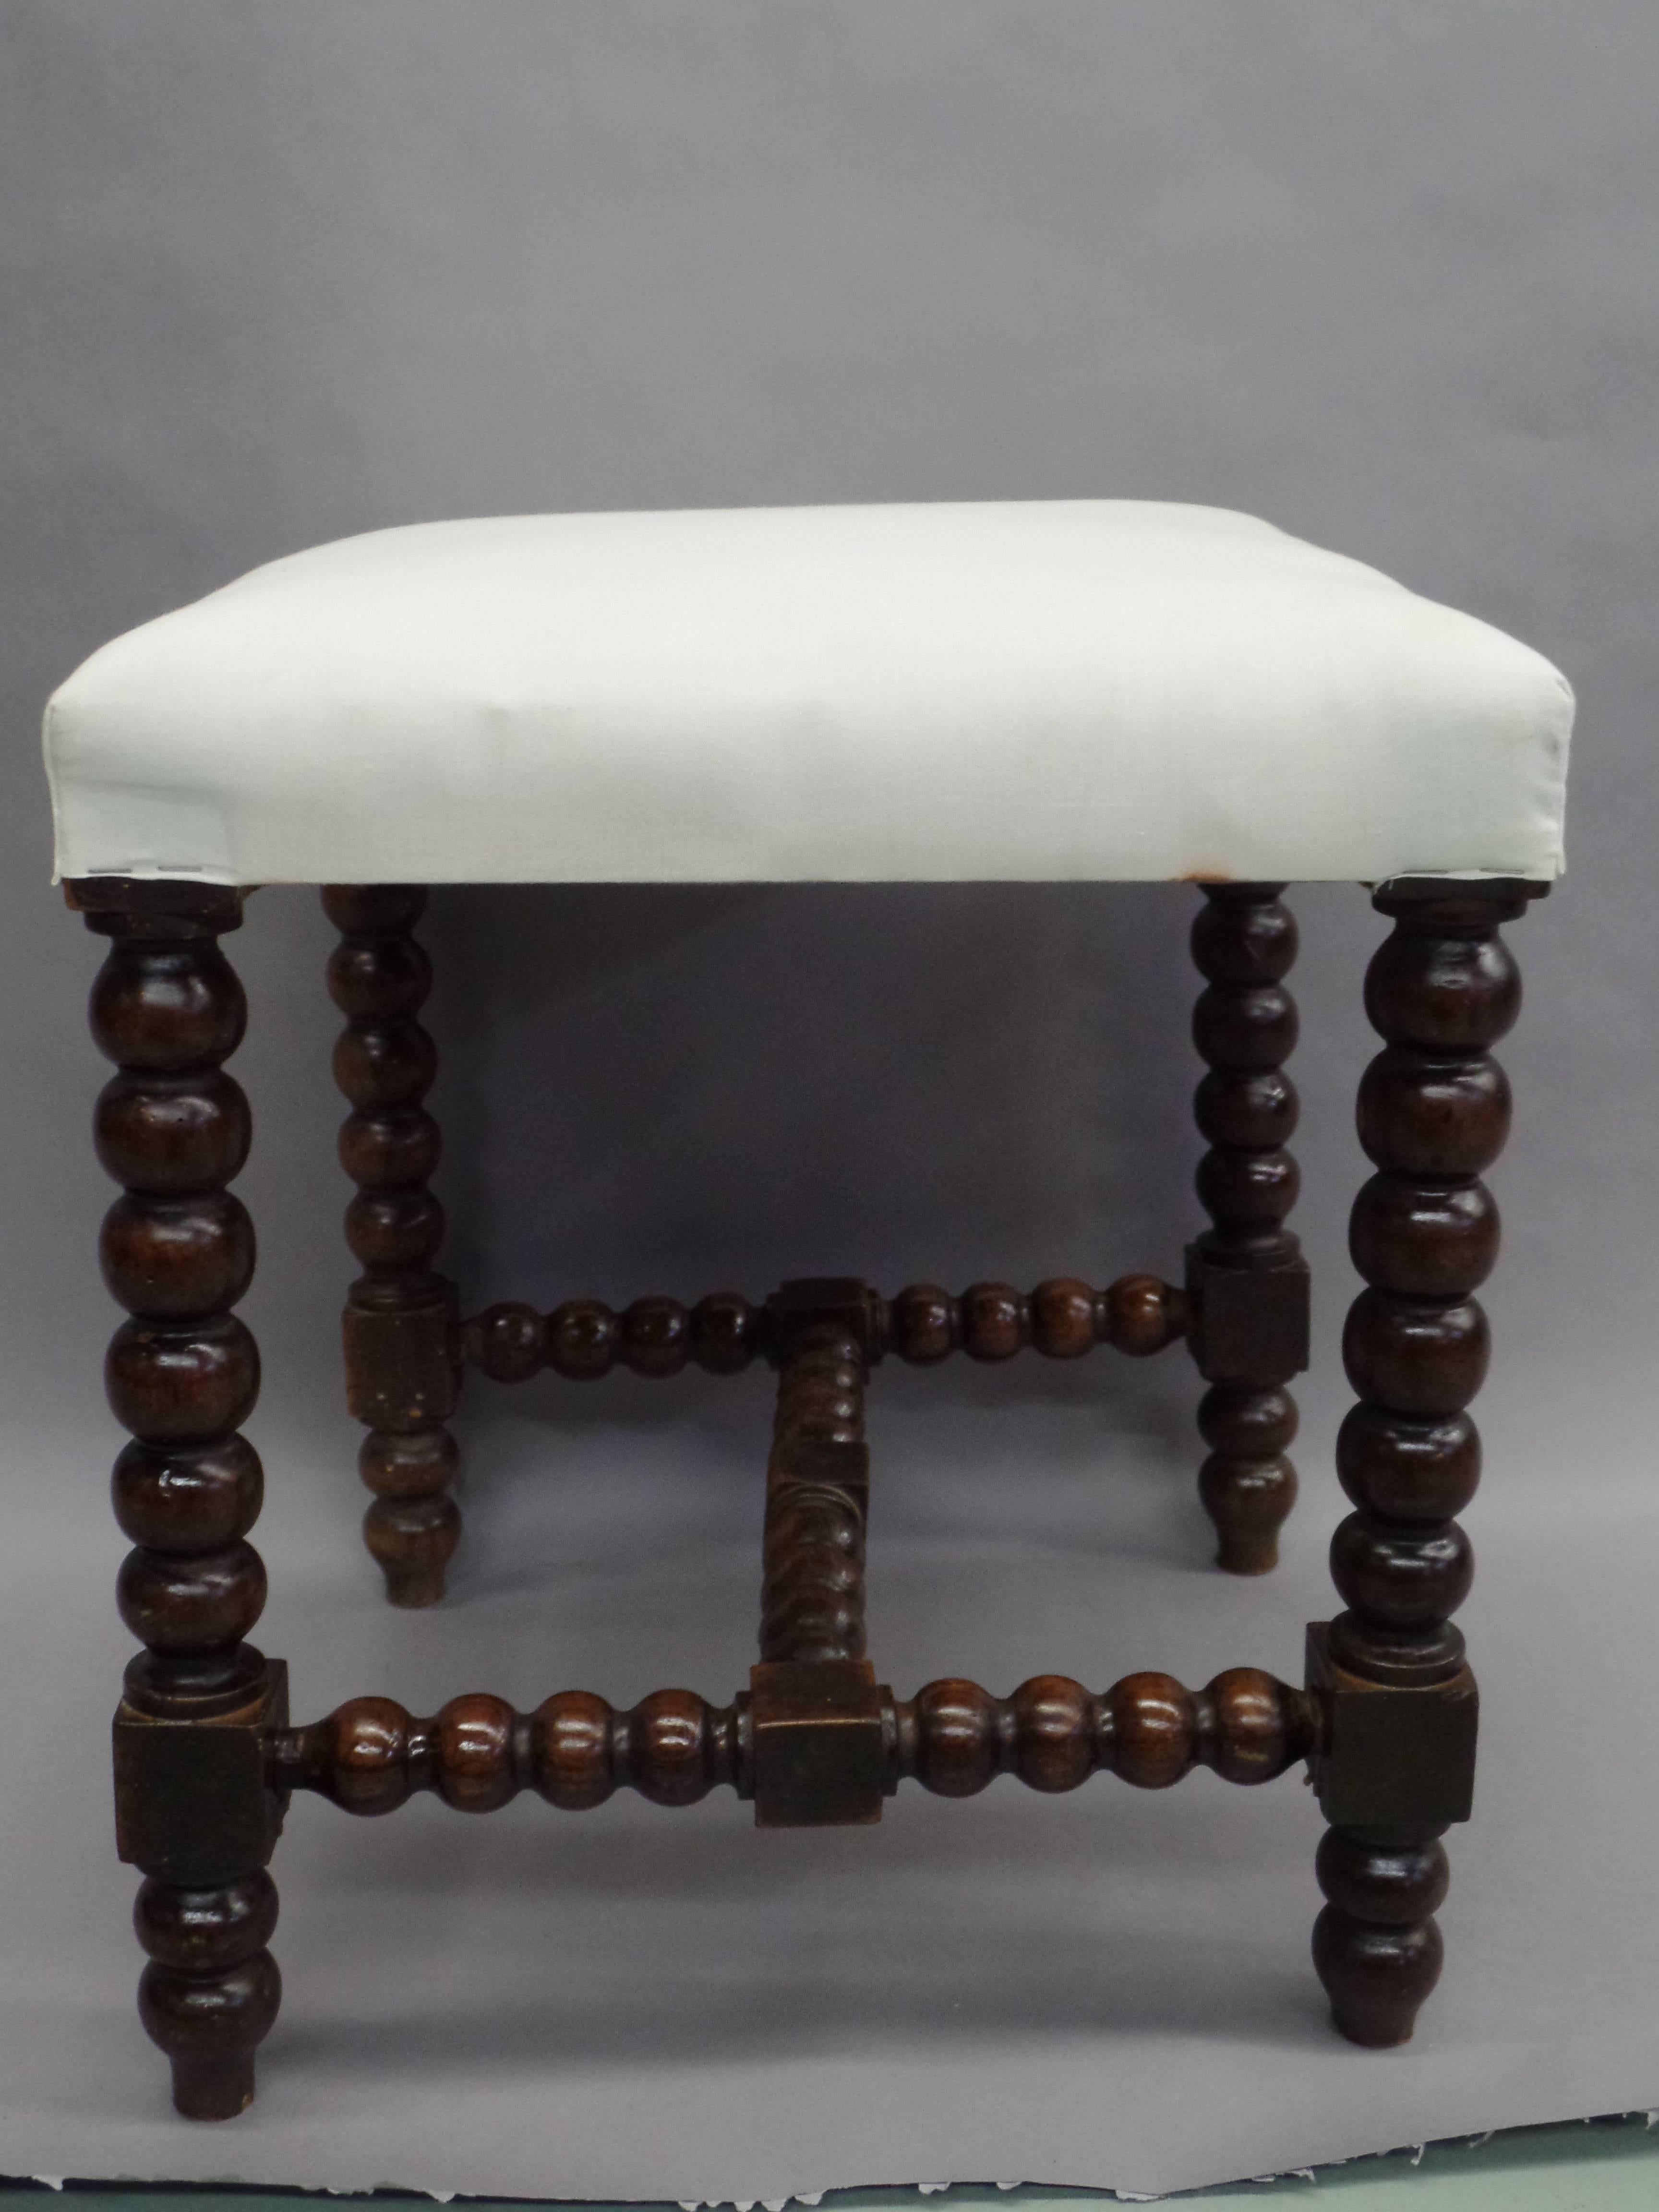 An elegant, sober pair of French Modern Neoclassical Louis XIII style hand-carved wood benches or stools with the legs and stretchers formed by successive stacked ball forms.